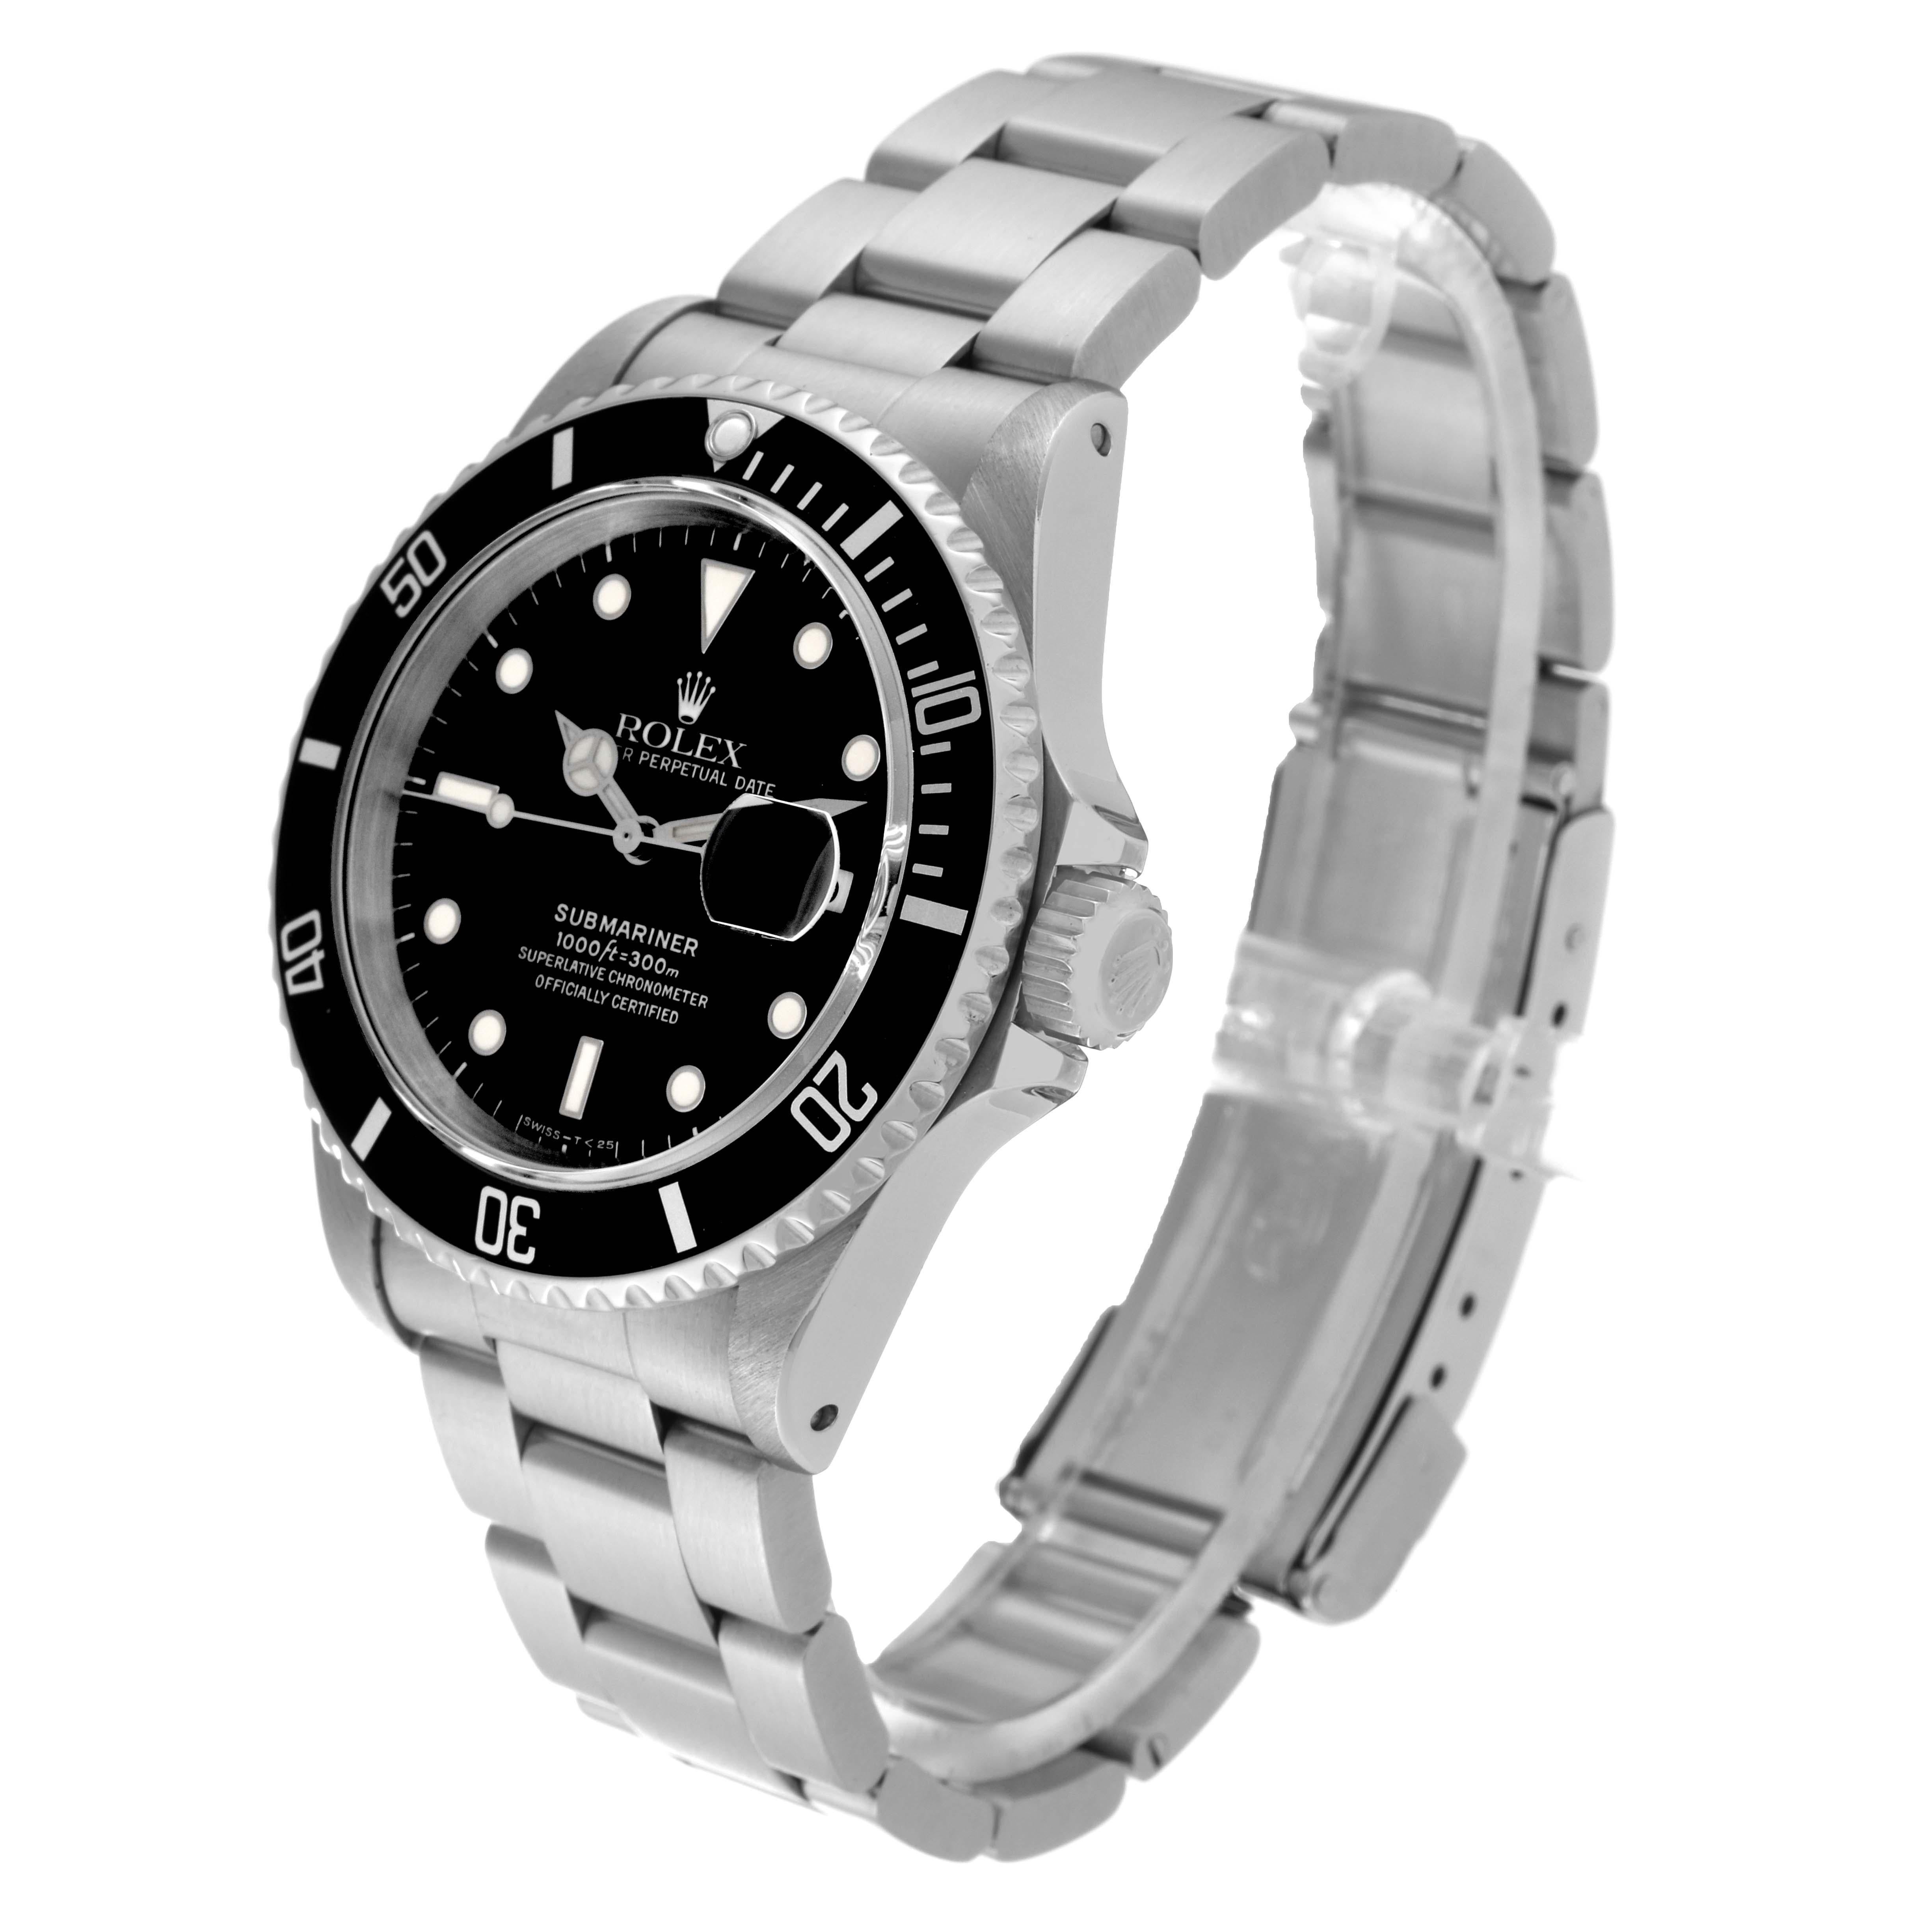 Rolex Submariner Date Black Dial Steel Mens Watch 16610 Box Papers 8